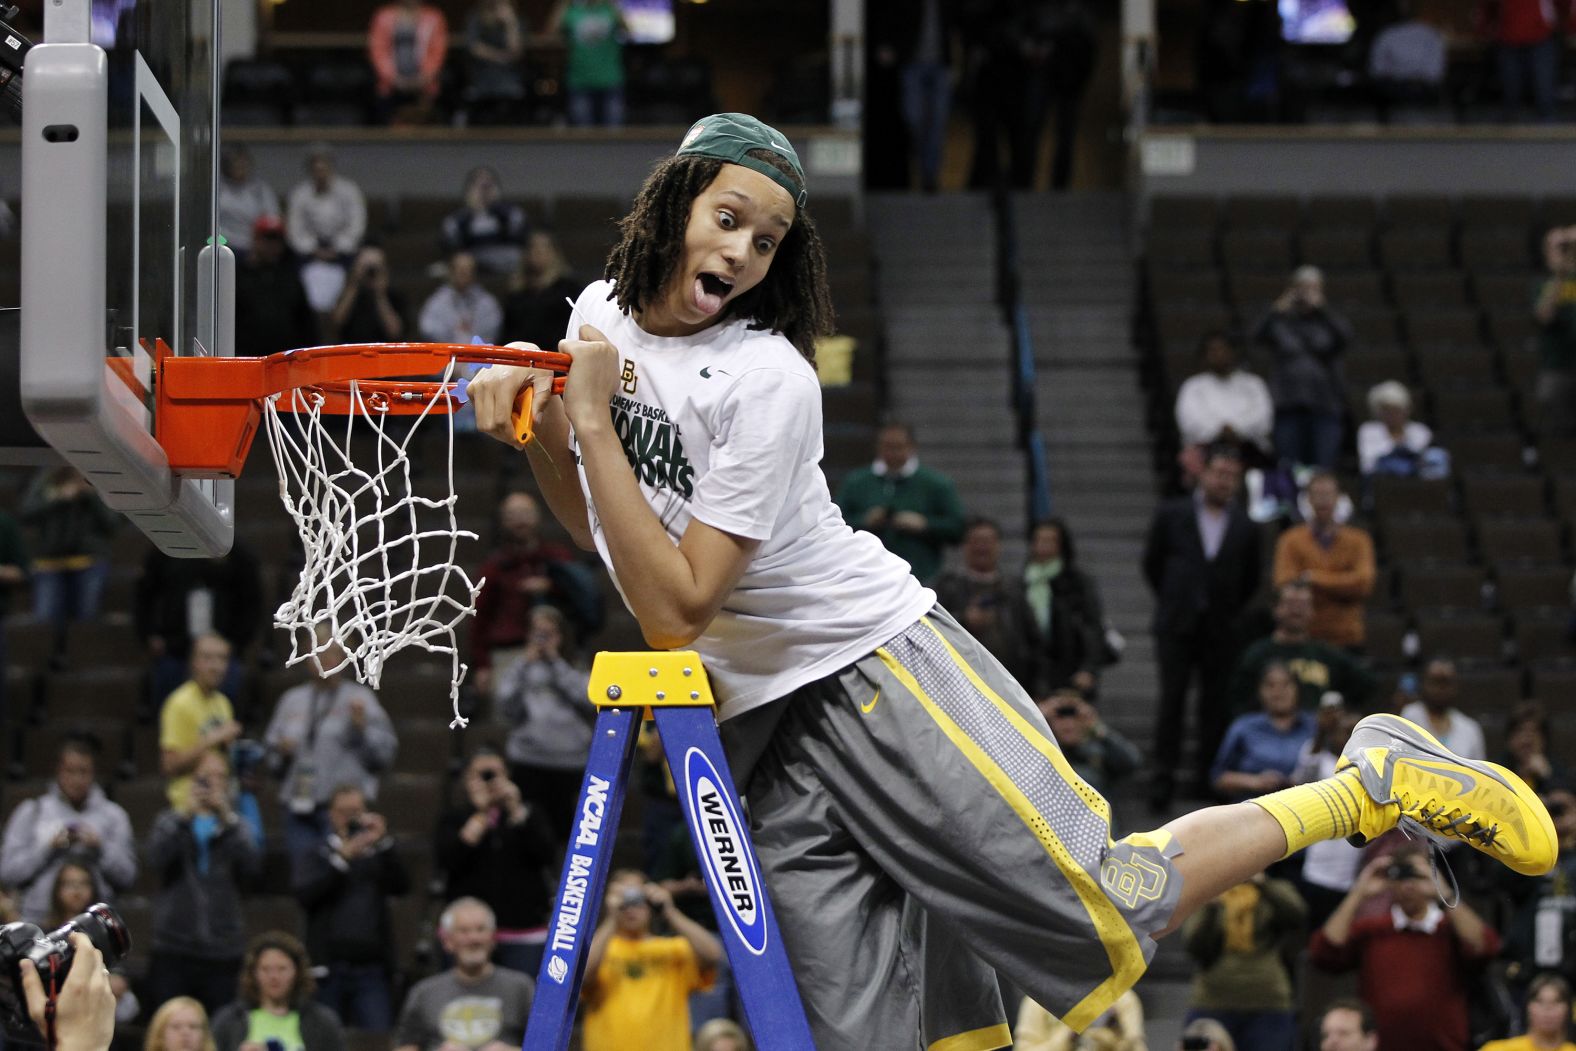 Griner celebrates after Baylor won the NCAA title in 2012. She was named the Final Four's Most Outstanding Player as Baylor went 40-0 on the season.